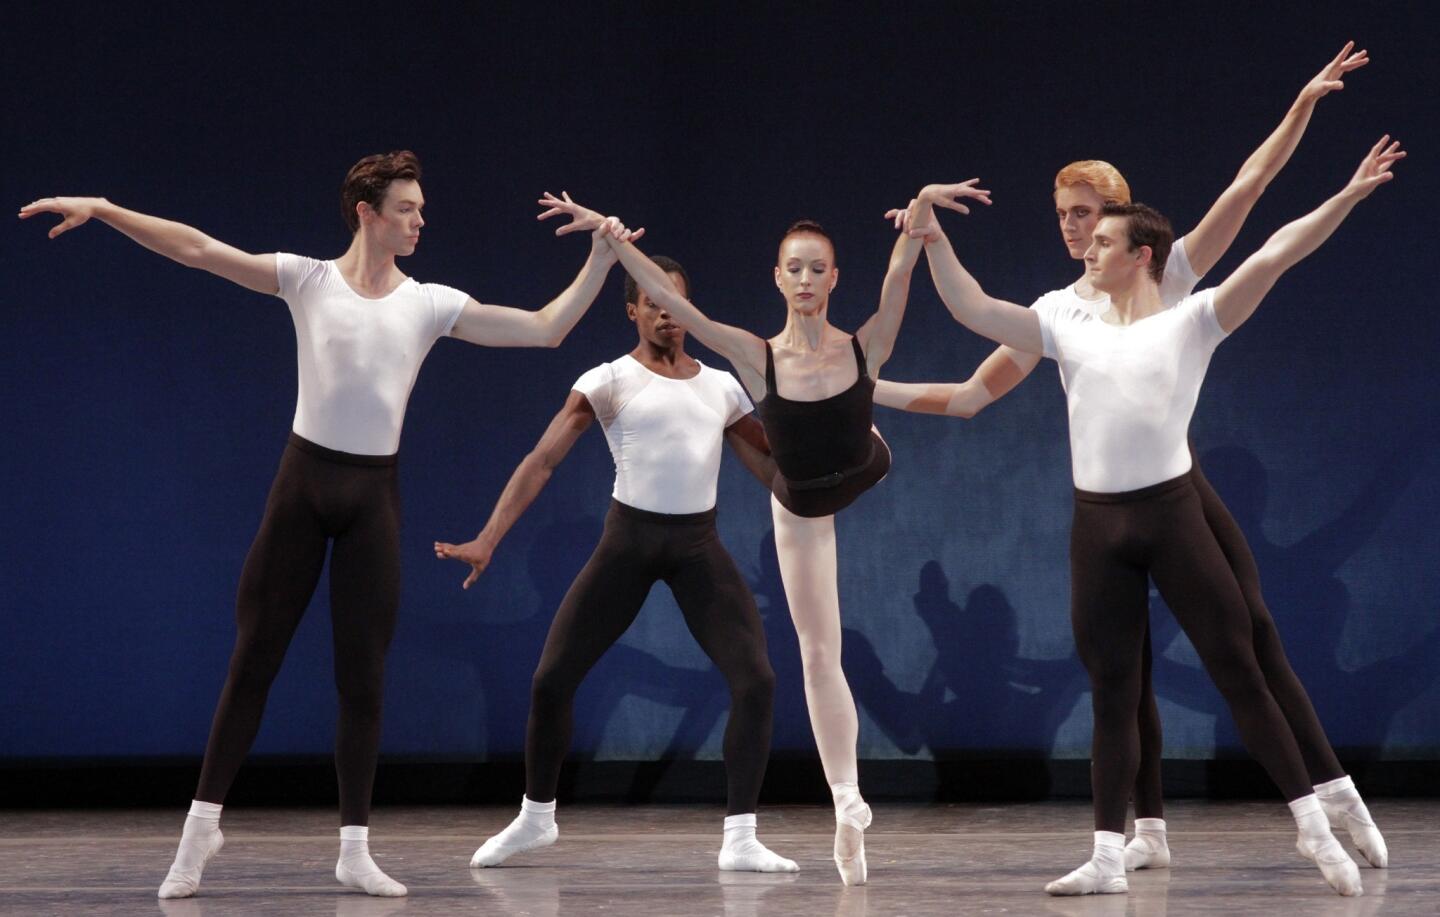 Kate Highstrete and compatriots perform the piece "The Four Temperaments" during Los Angeles Ballet's Balanchine Festival 2013 at UCLA's Royce Hall on March 23, 2013. The festival is a celebration of master choreographer George Balanchine's legacy.